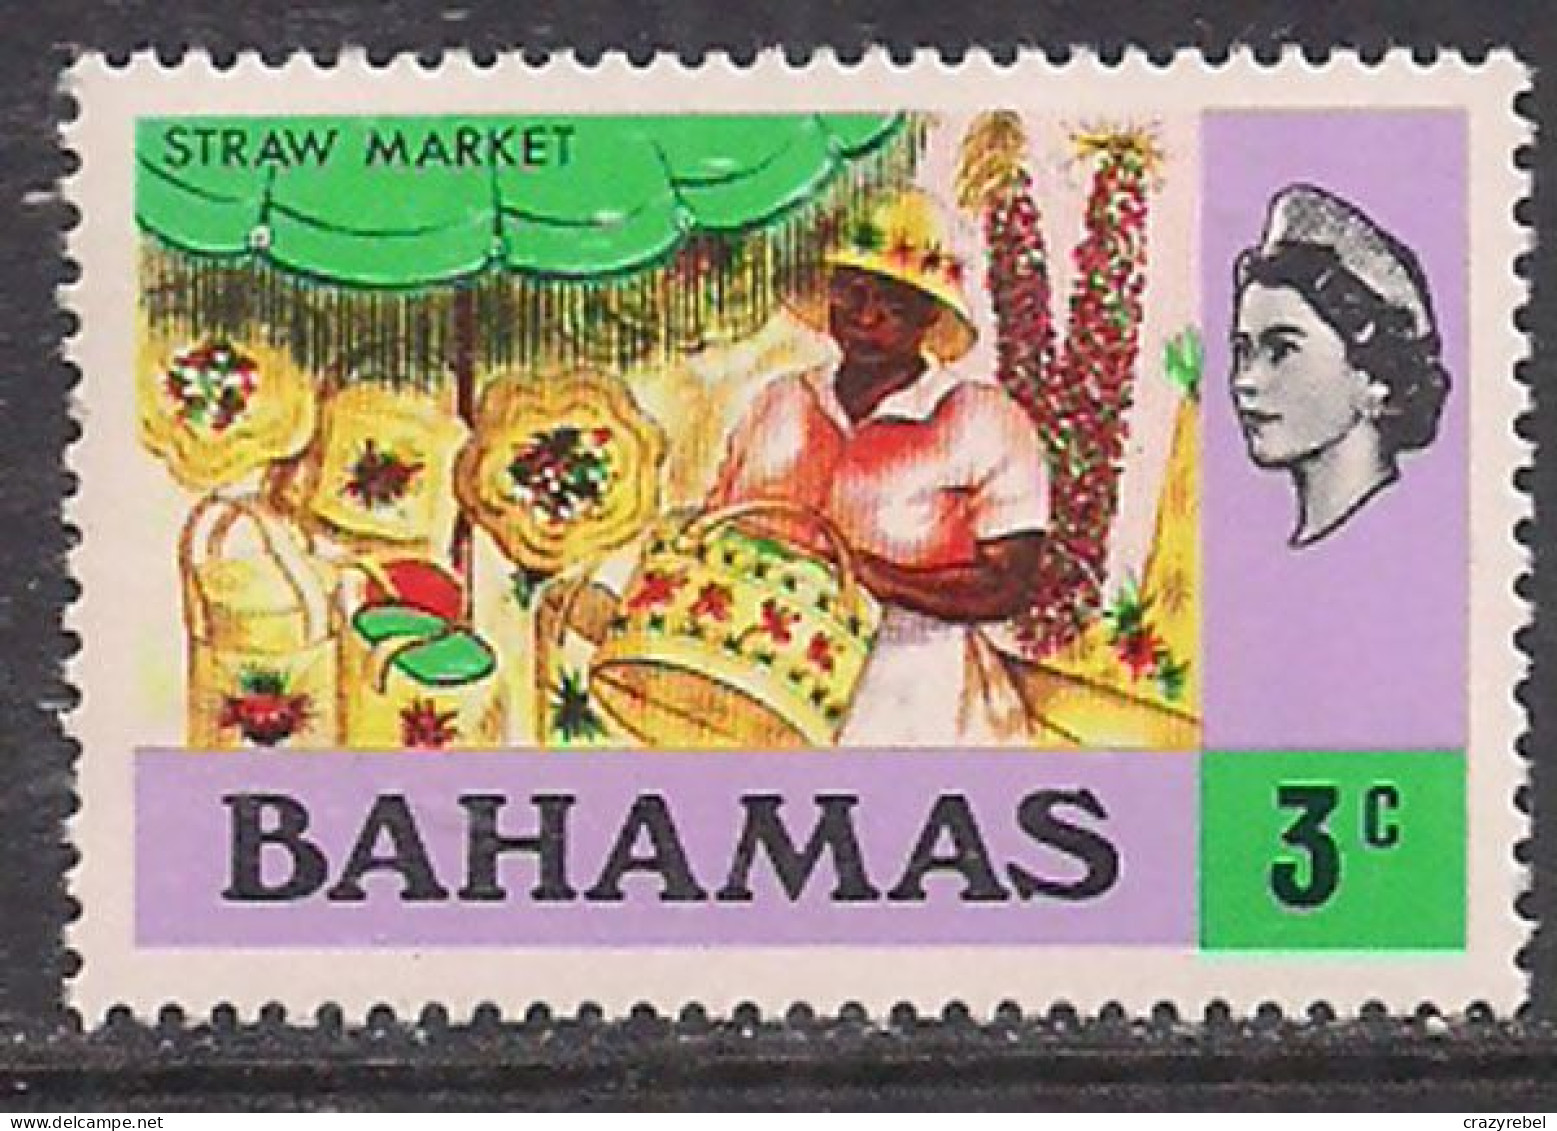 Bahamas 1971 QE2 3cents Market SG 361 MNH ( H578 ) - 1963-1973 Ministerial Government